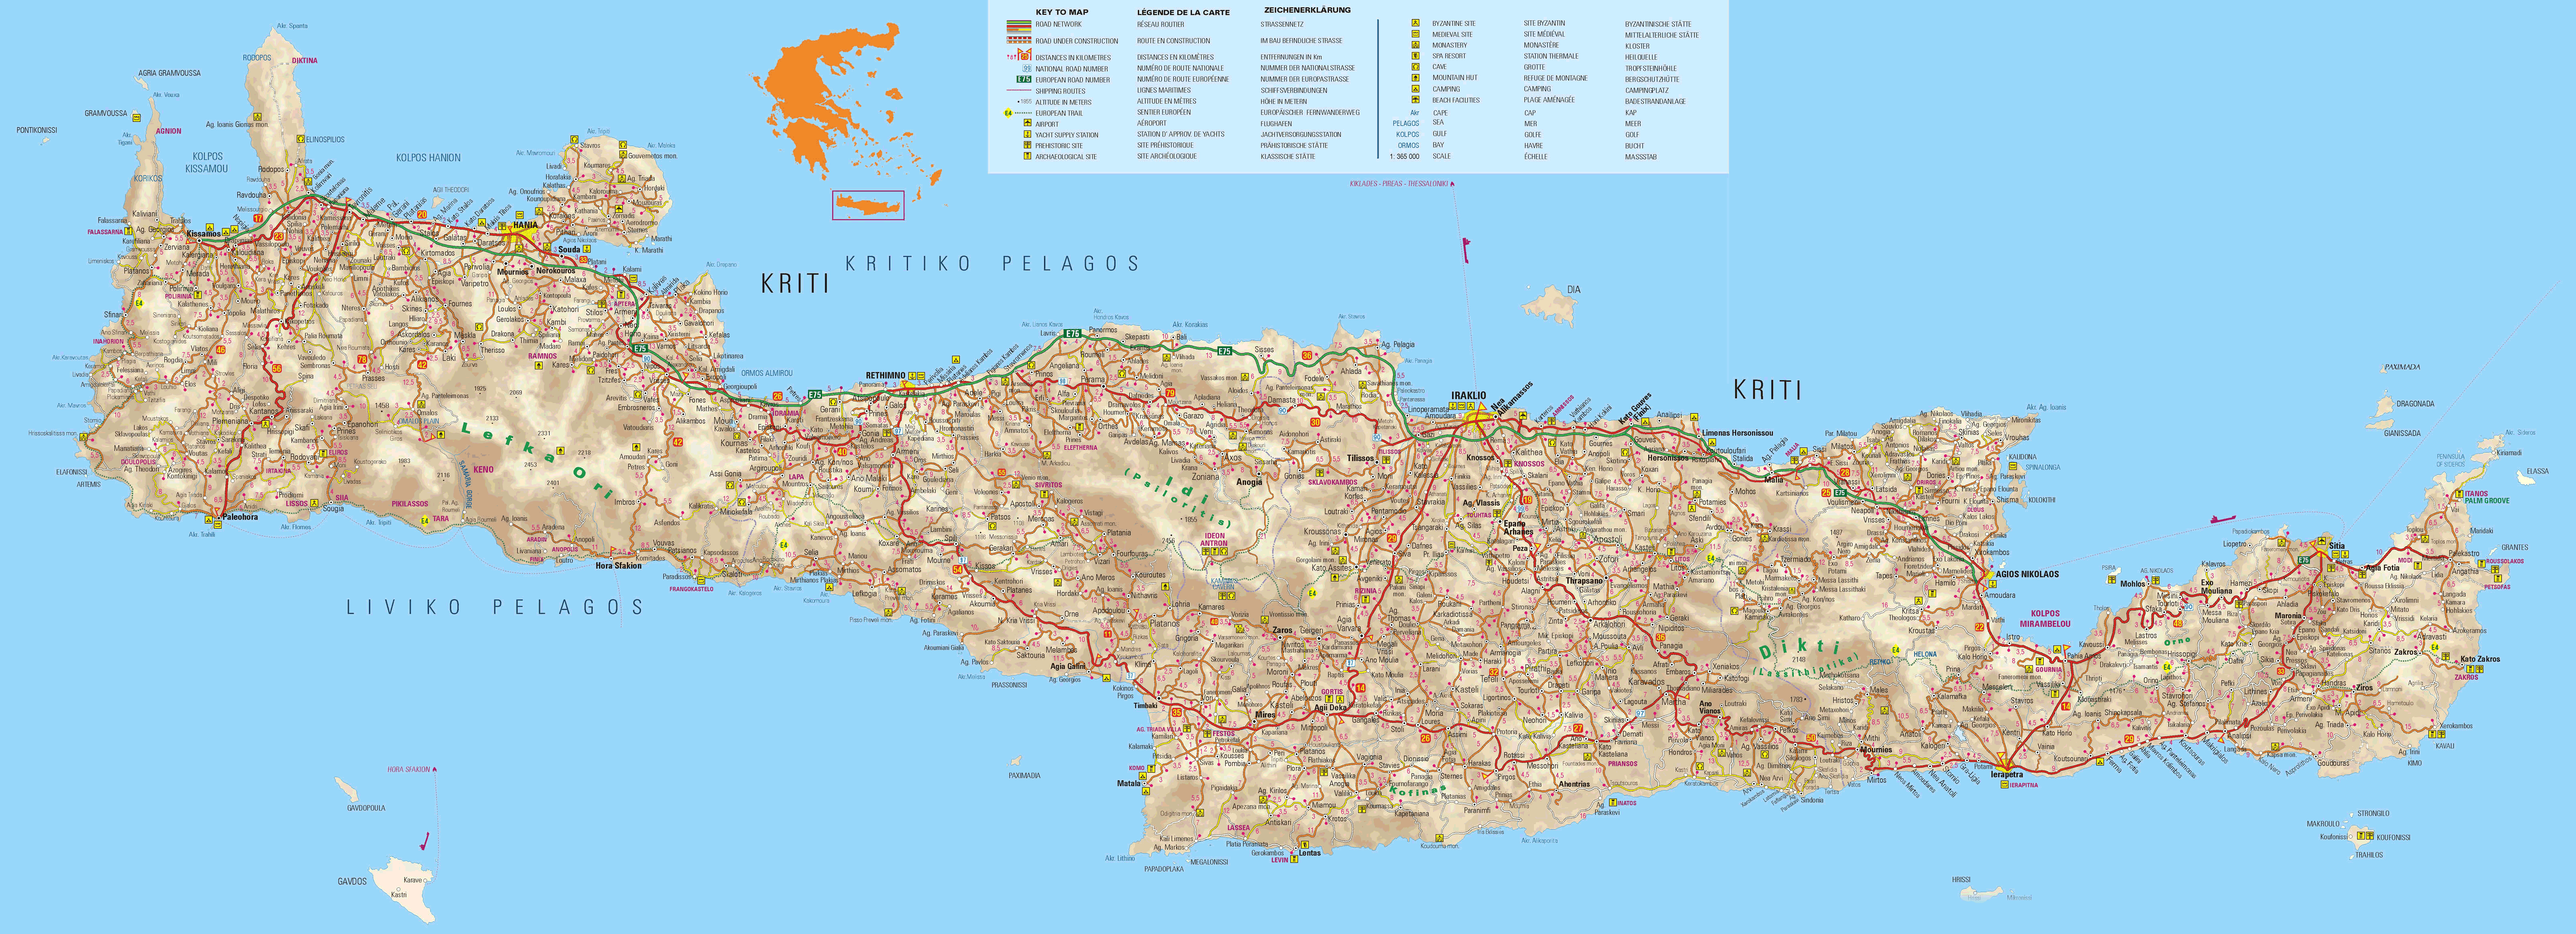 detailed map of the island of Crete